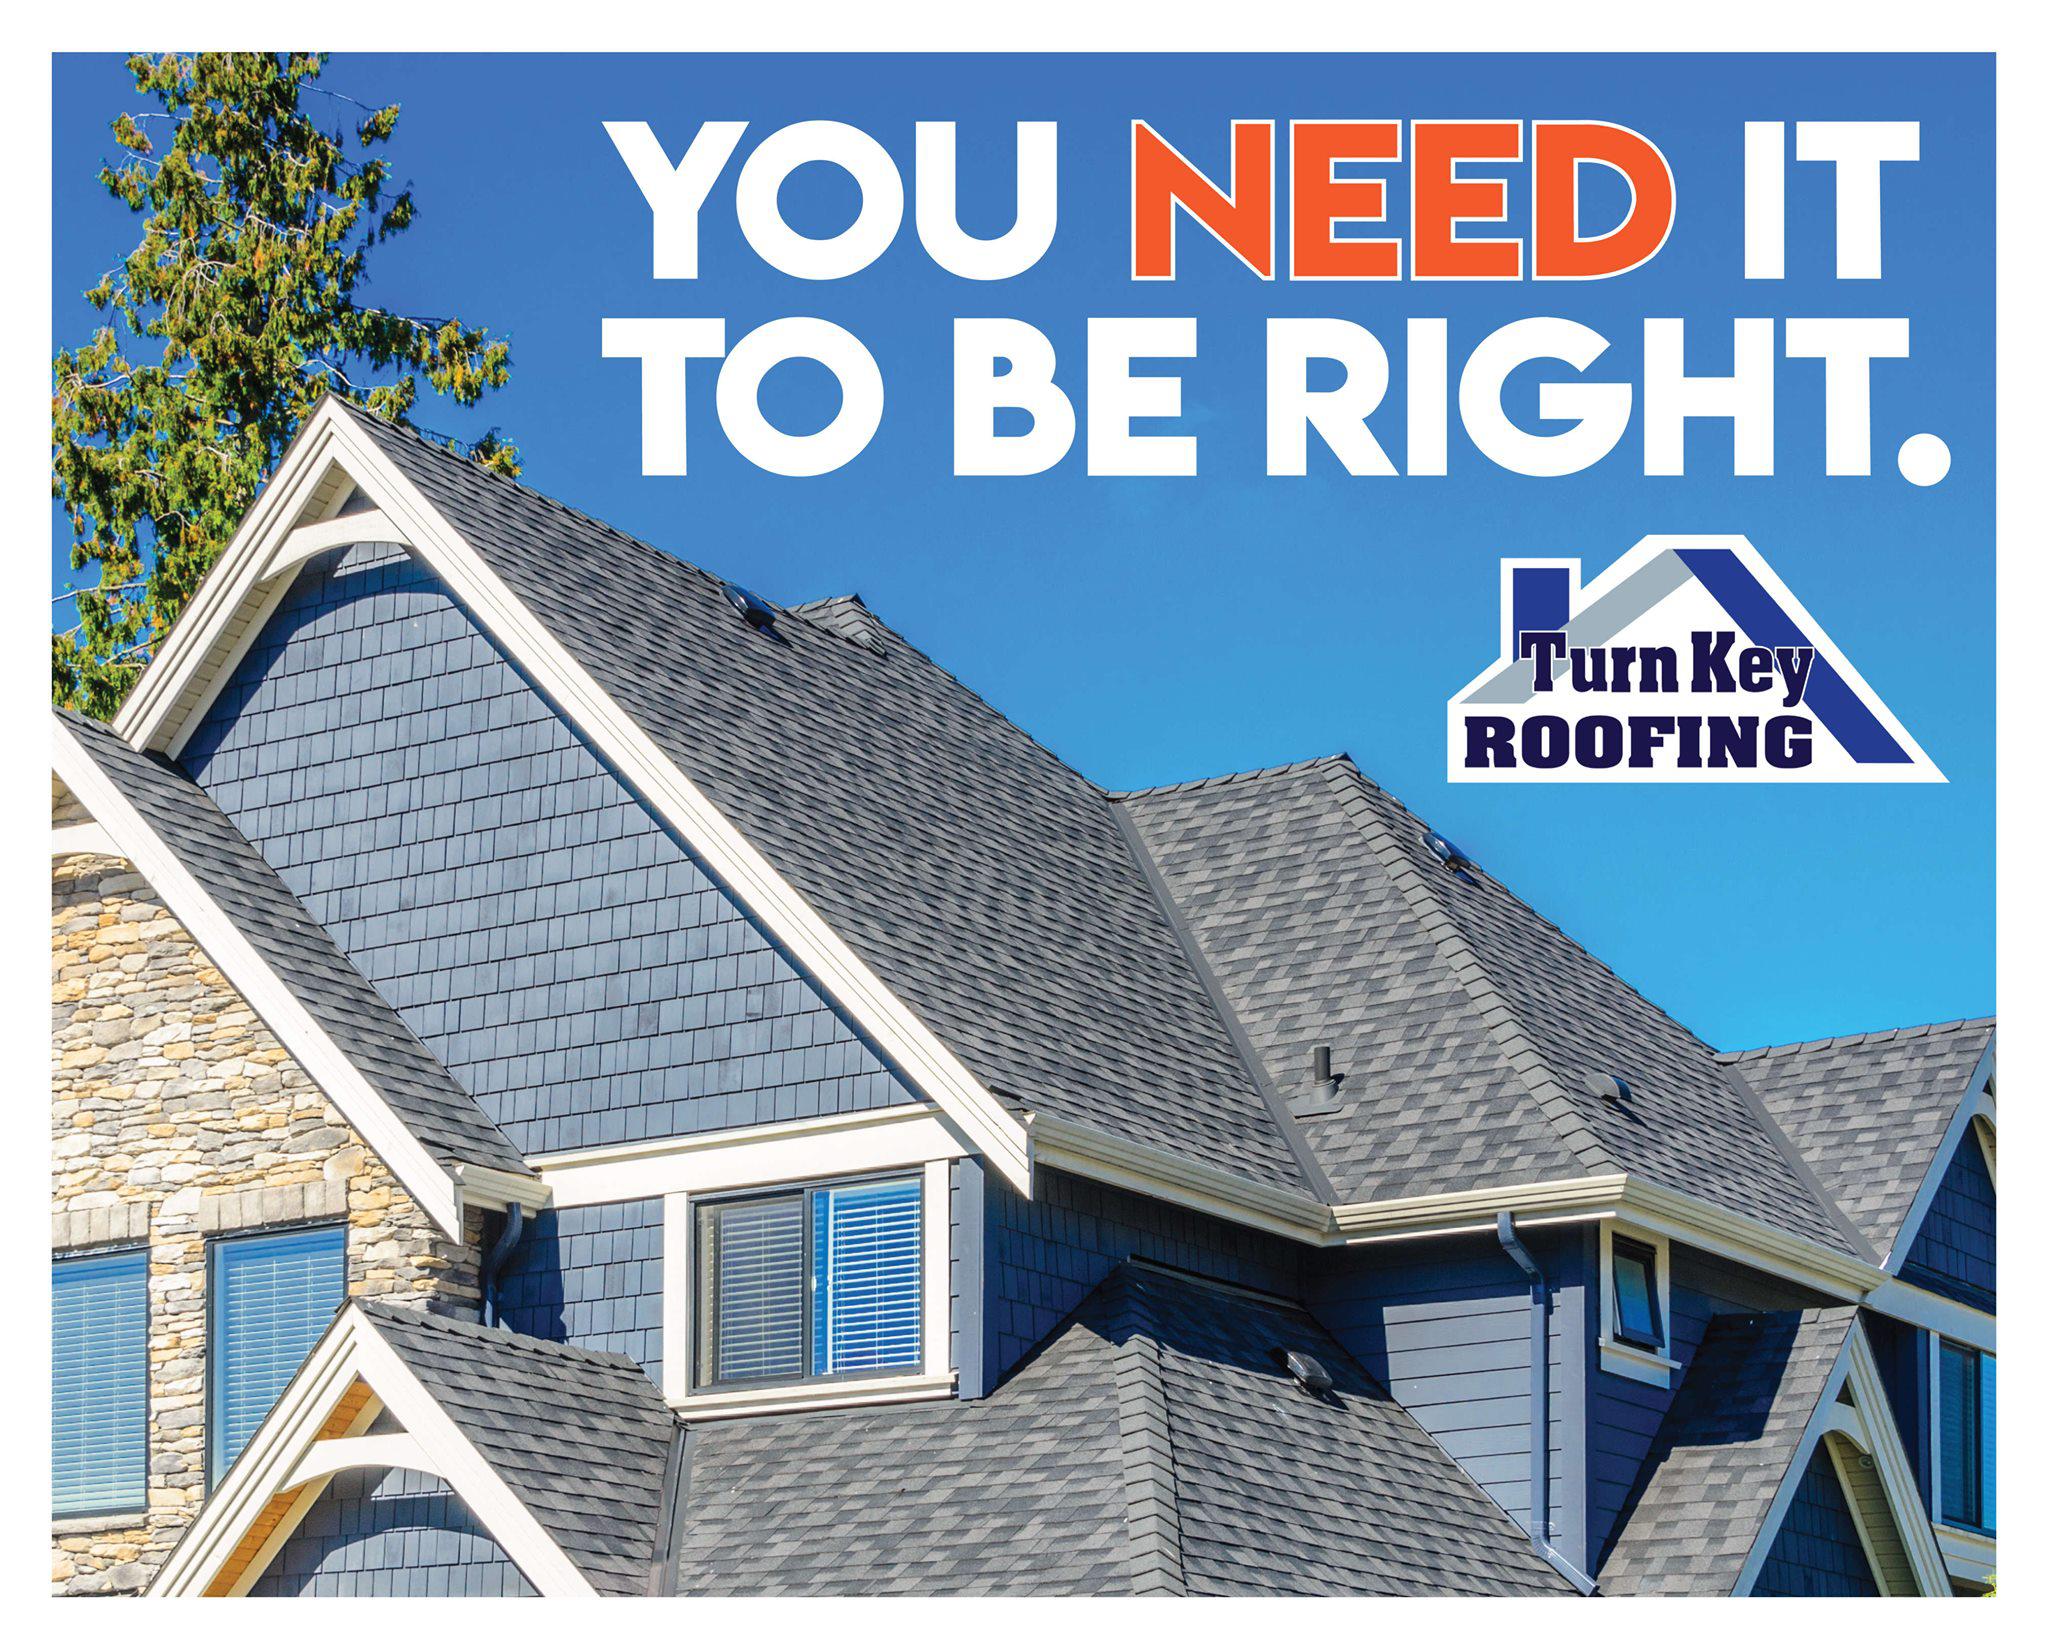 Turn Key Roofing and Home Improvements Photo